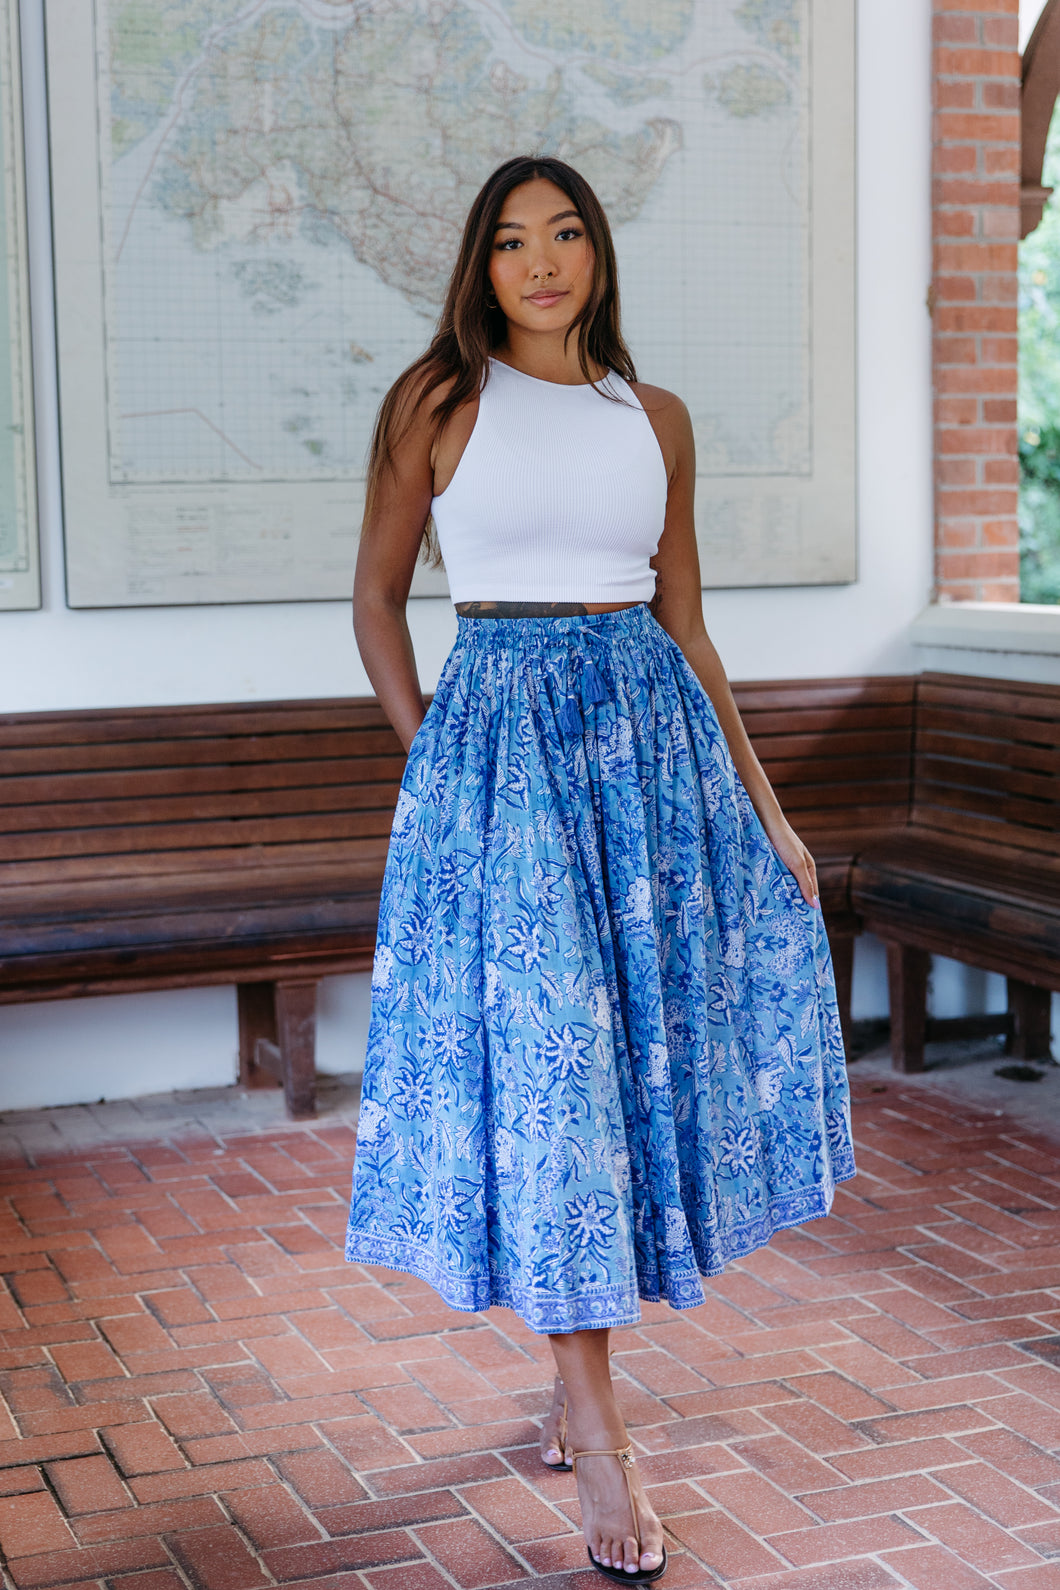 Panelled skirt with pockets - blue floral